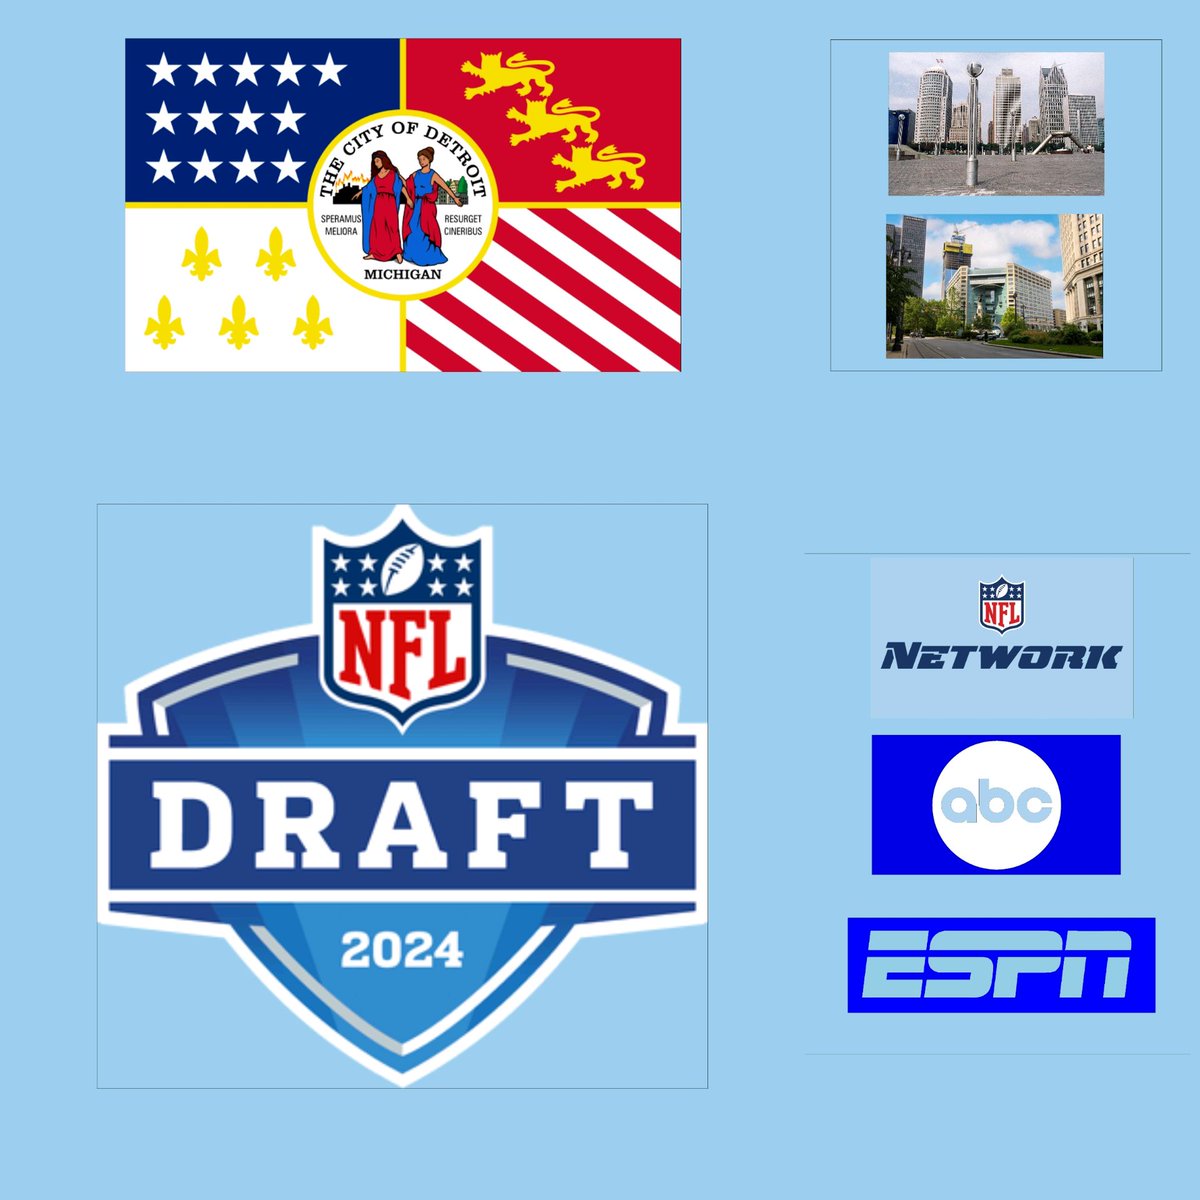 LIVE on ABC, ESPN, & #NFL Network 2024 #NFLDraft 1st Round from Campus Martius Park & Hart Plaza in Detroit Michigan